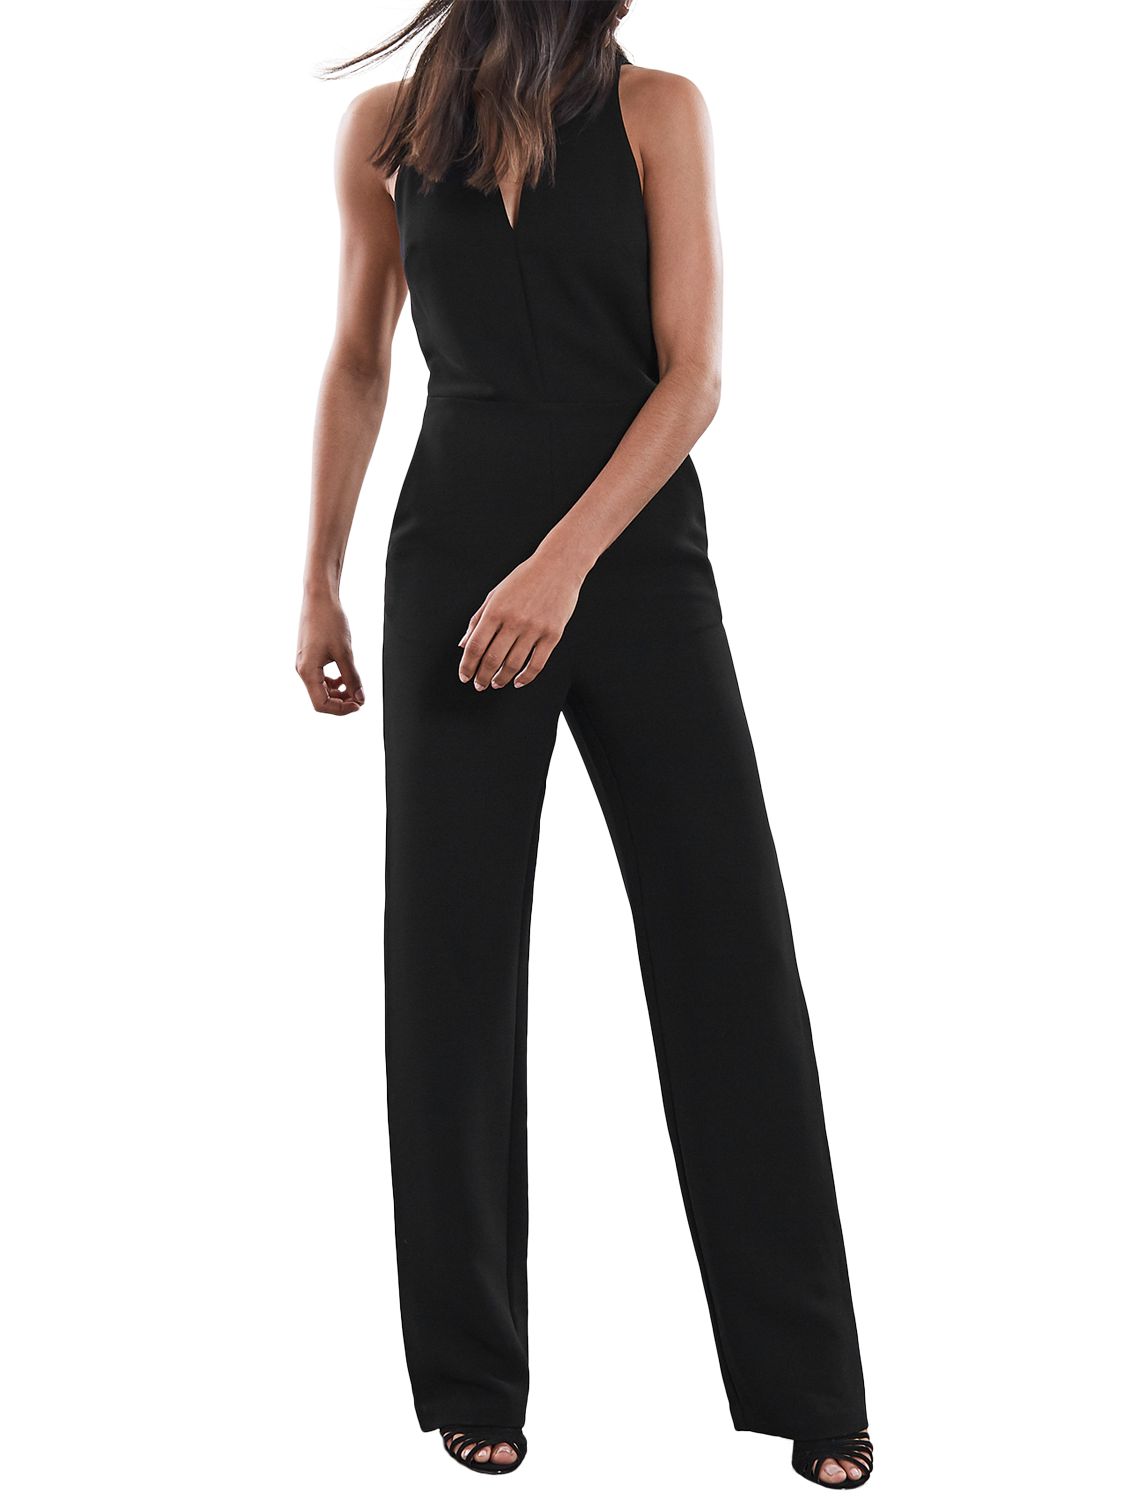 Reiss Naddia Strappy Plunge Jumpsuit, Black at John Lewis & Partners